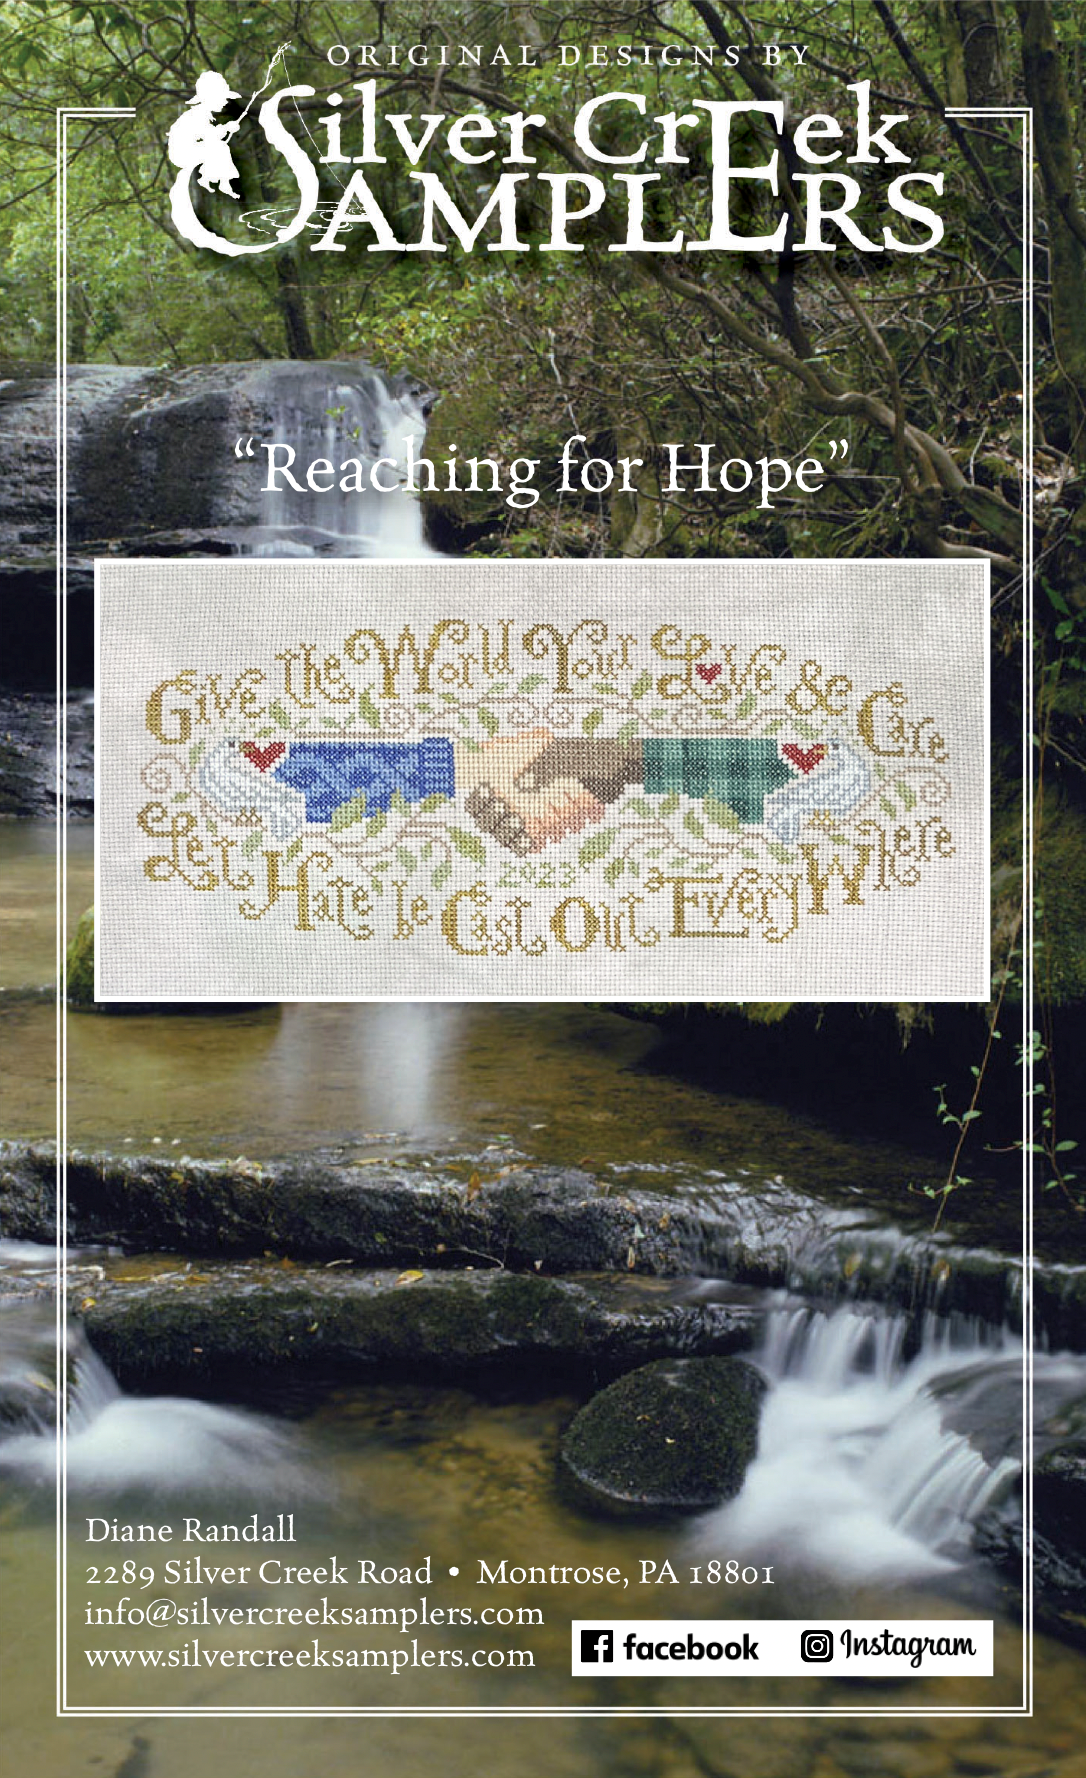 Reaching for Hope by Silver Creek Samplers